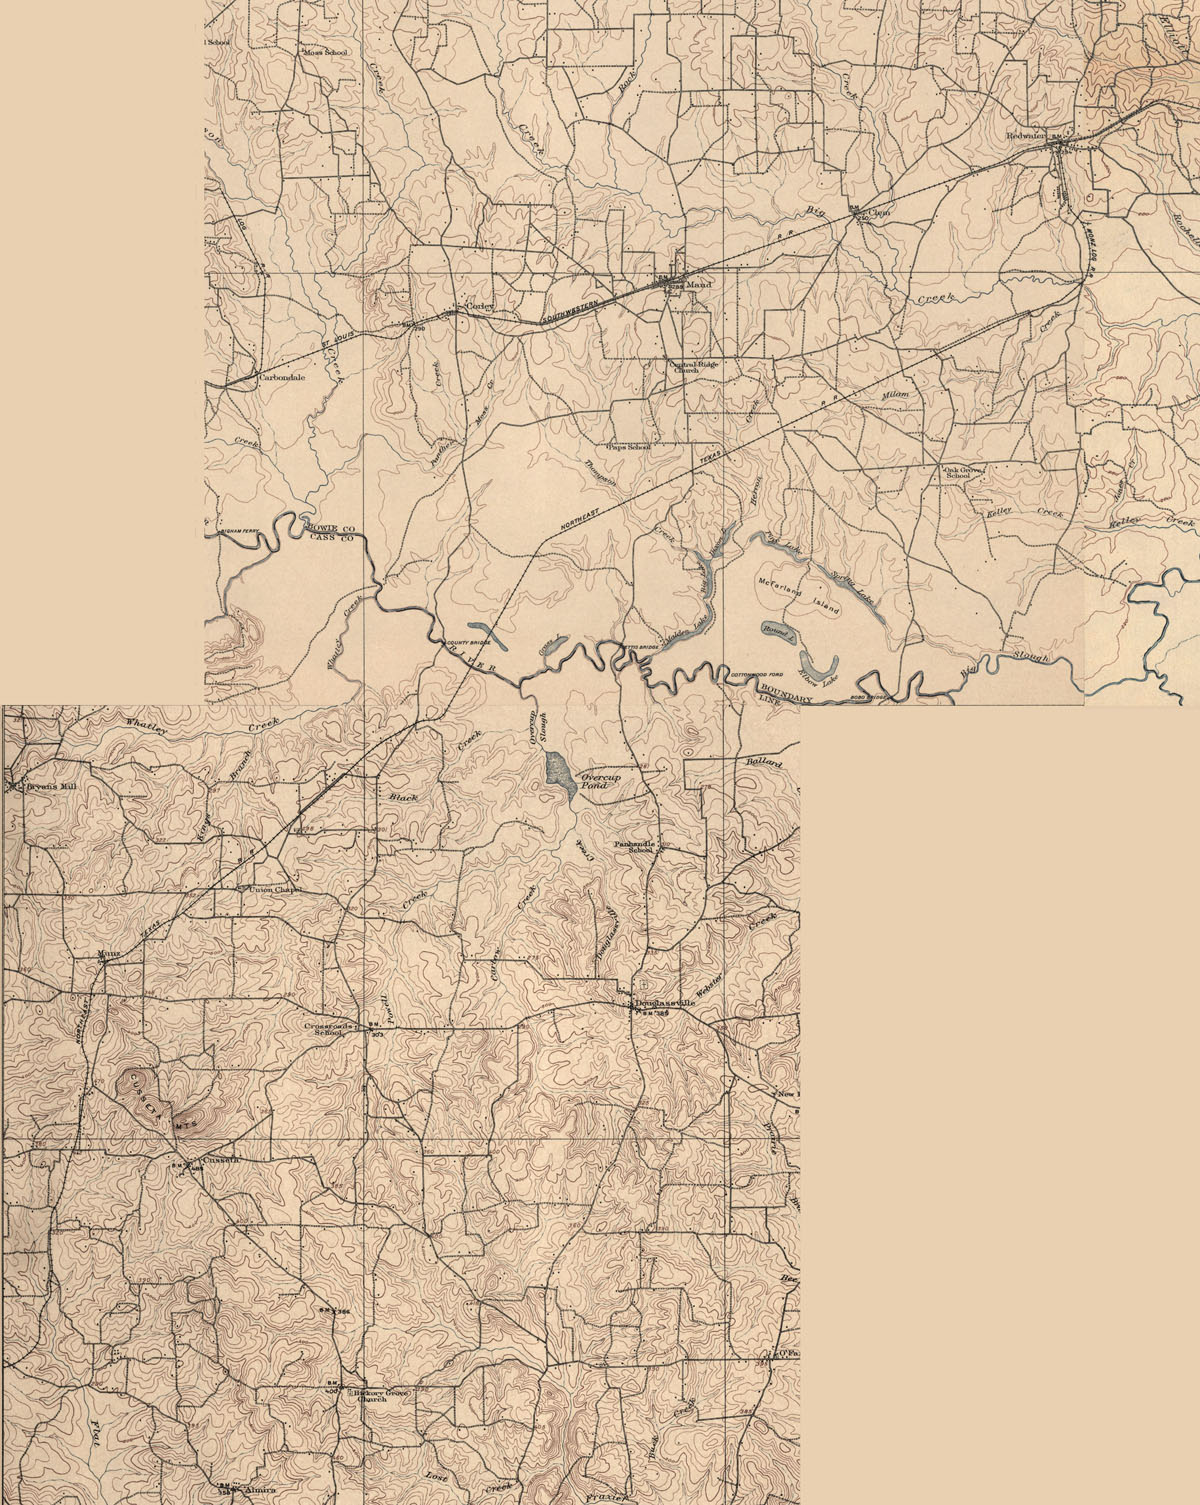 North-East Texas Railroad Company (Redwater Lumber Company) (Tex.), Map Showing Route in the period 1906-1907.